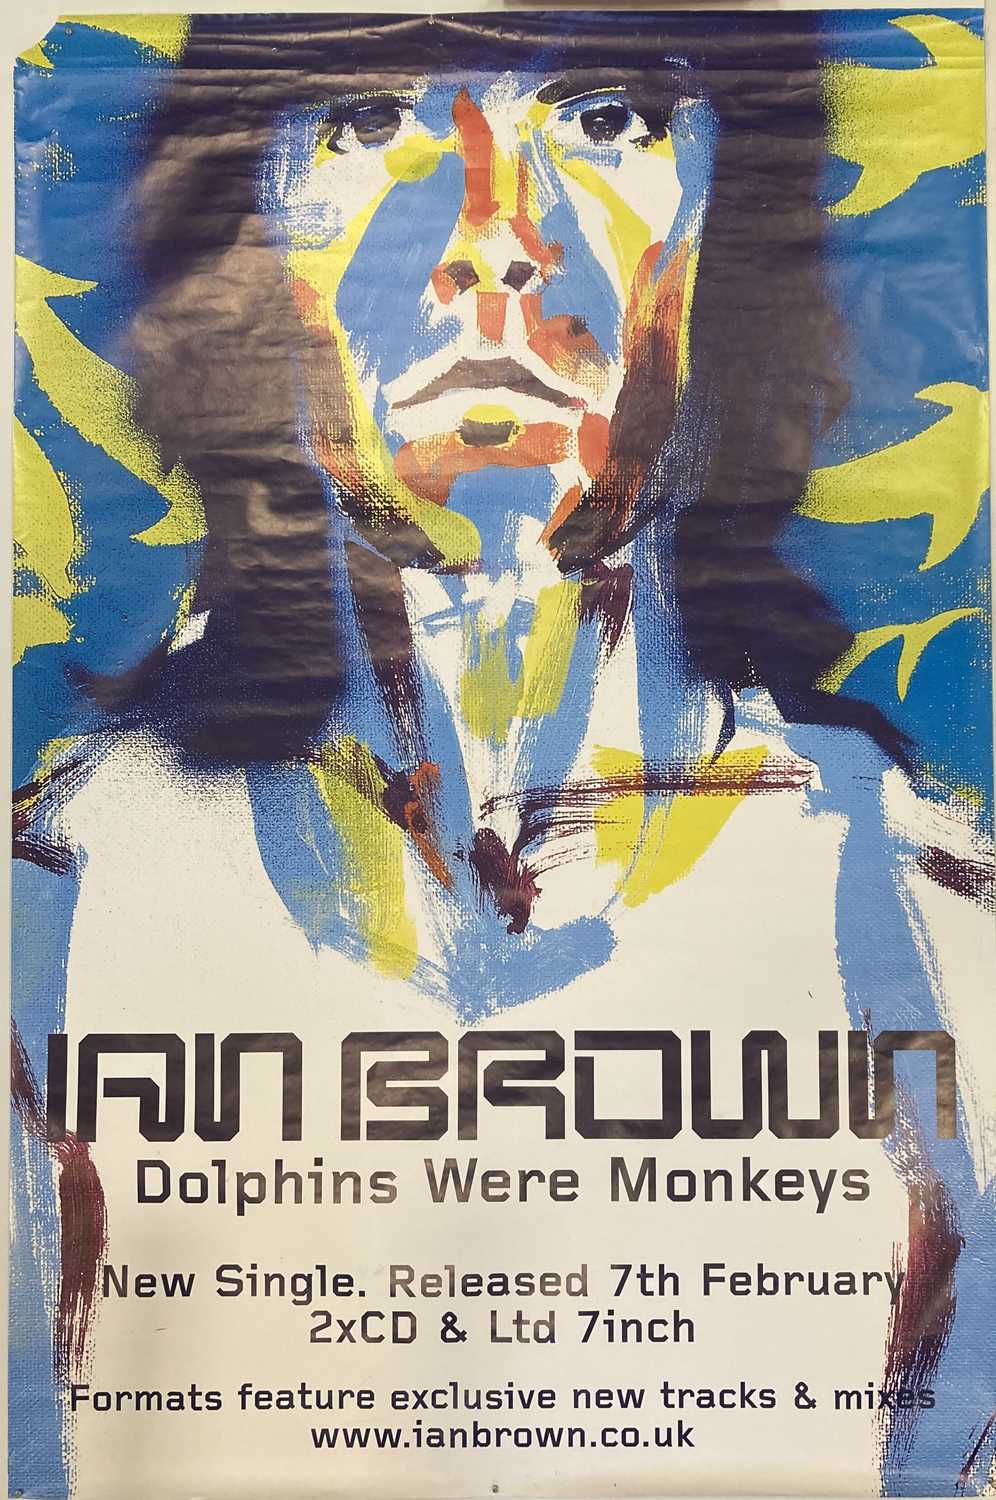 Lot 292 - IAN BROWN POSTER AND SIGNED PAGE